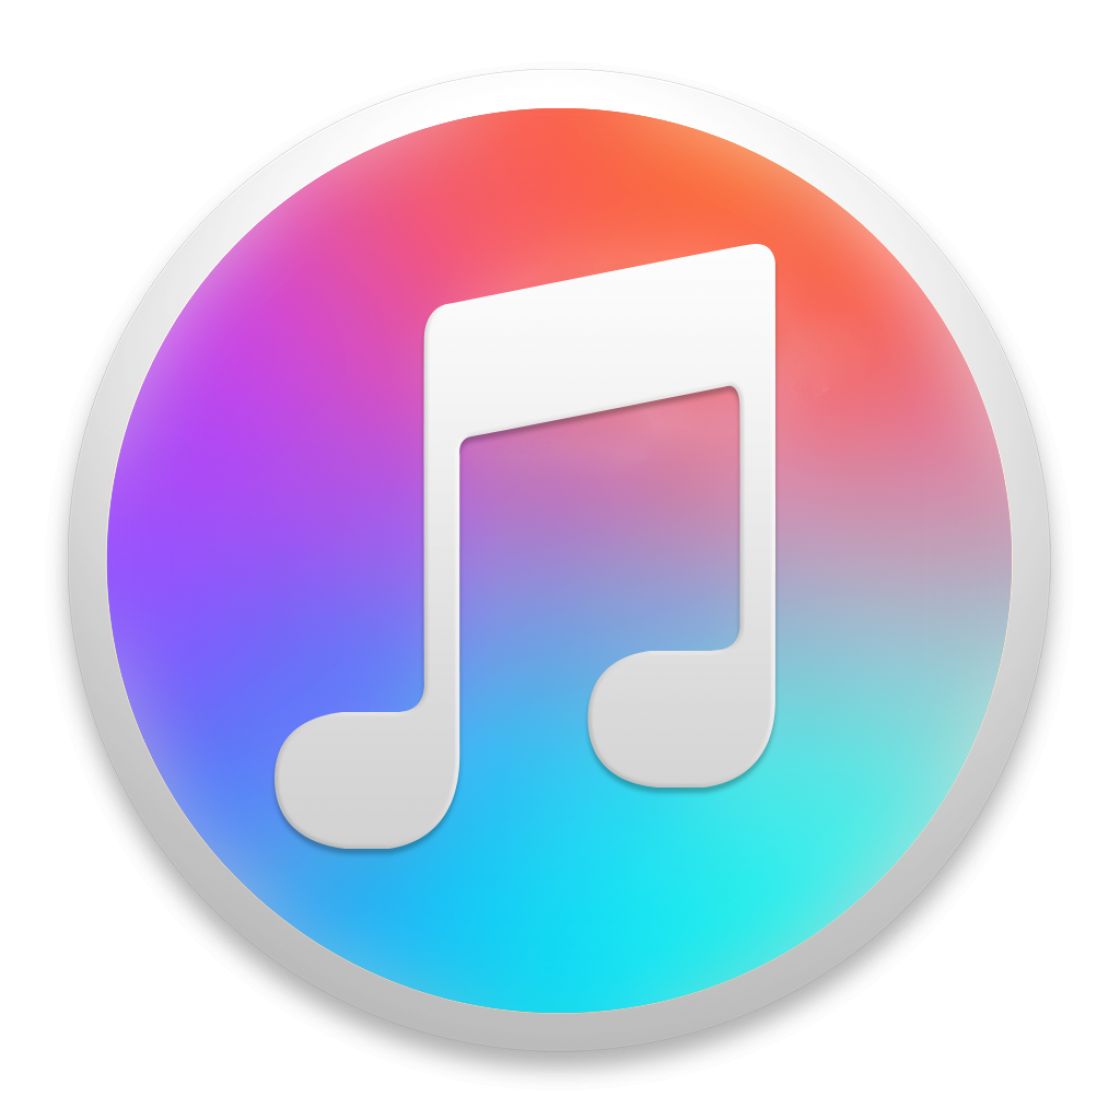 4 Tips for Using iTunes as an Online Radio Station